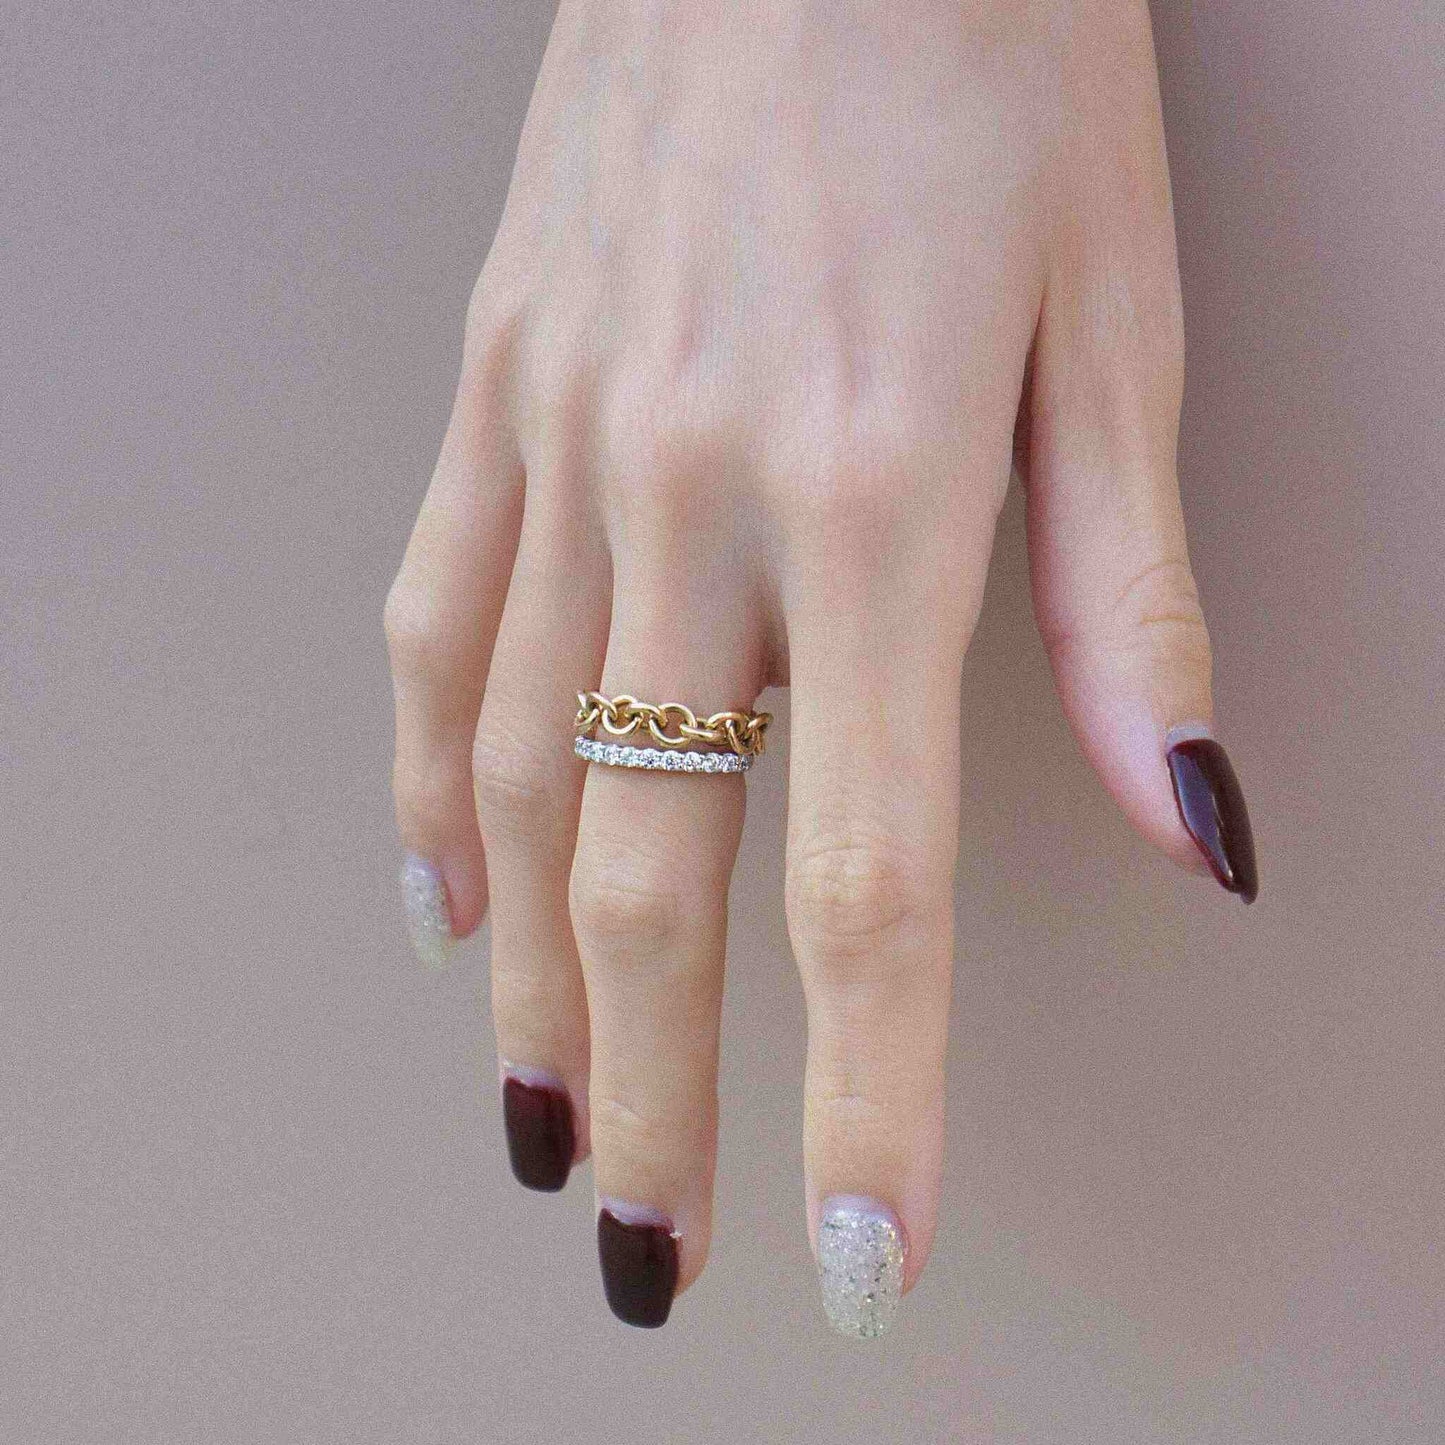 chain collection / large size luxe round chain ring